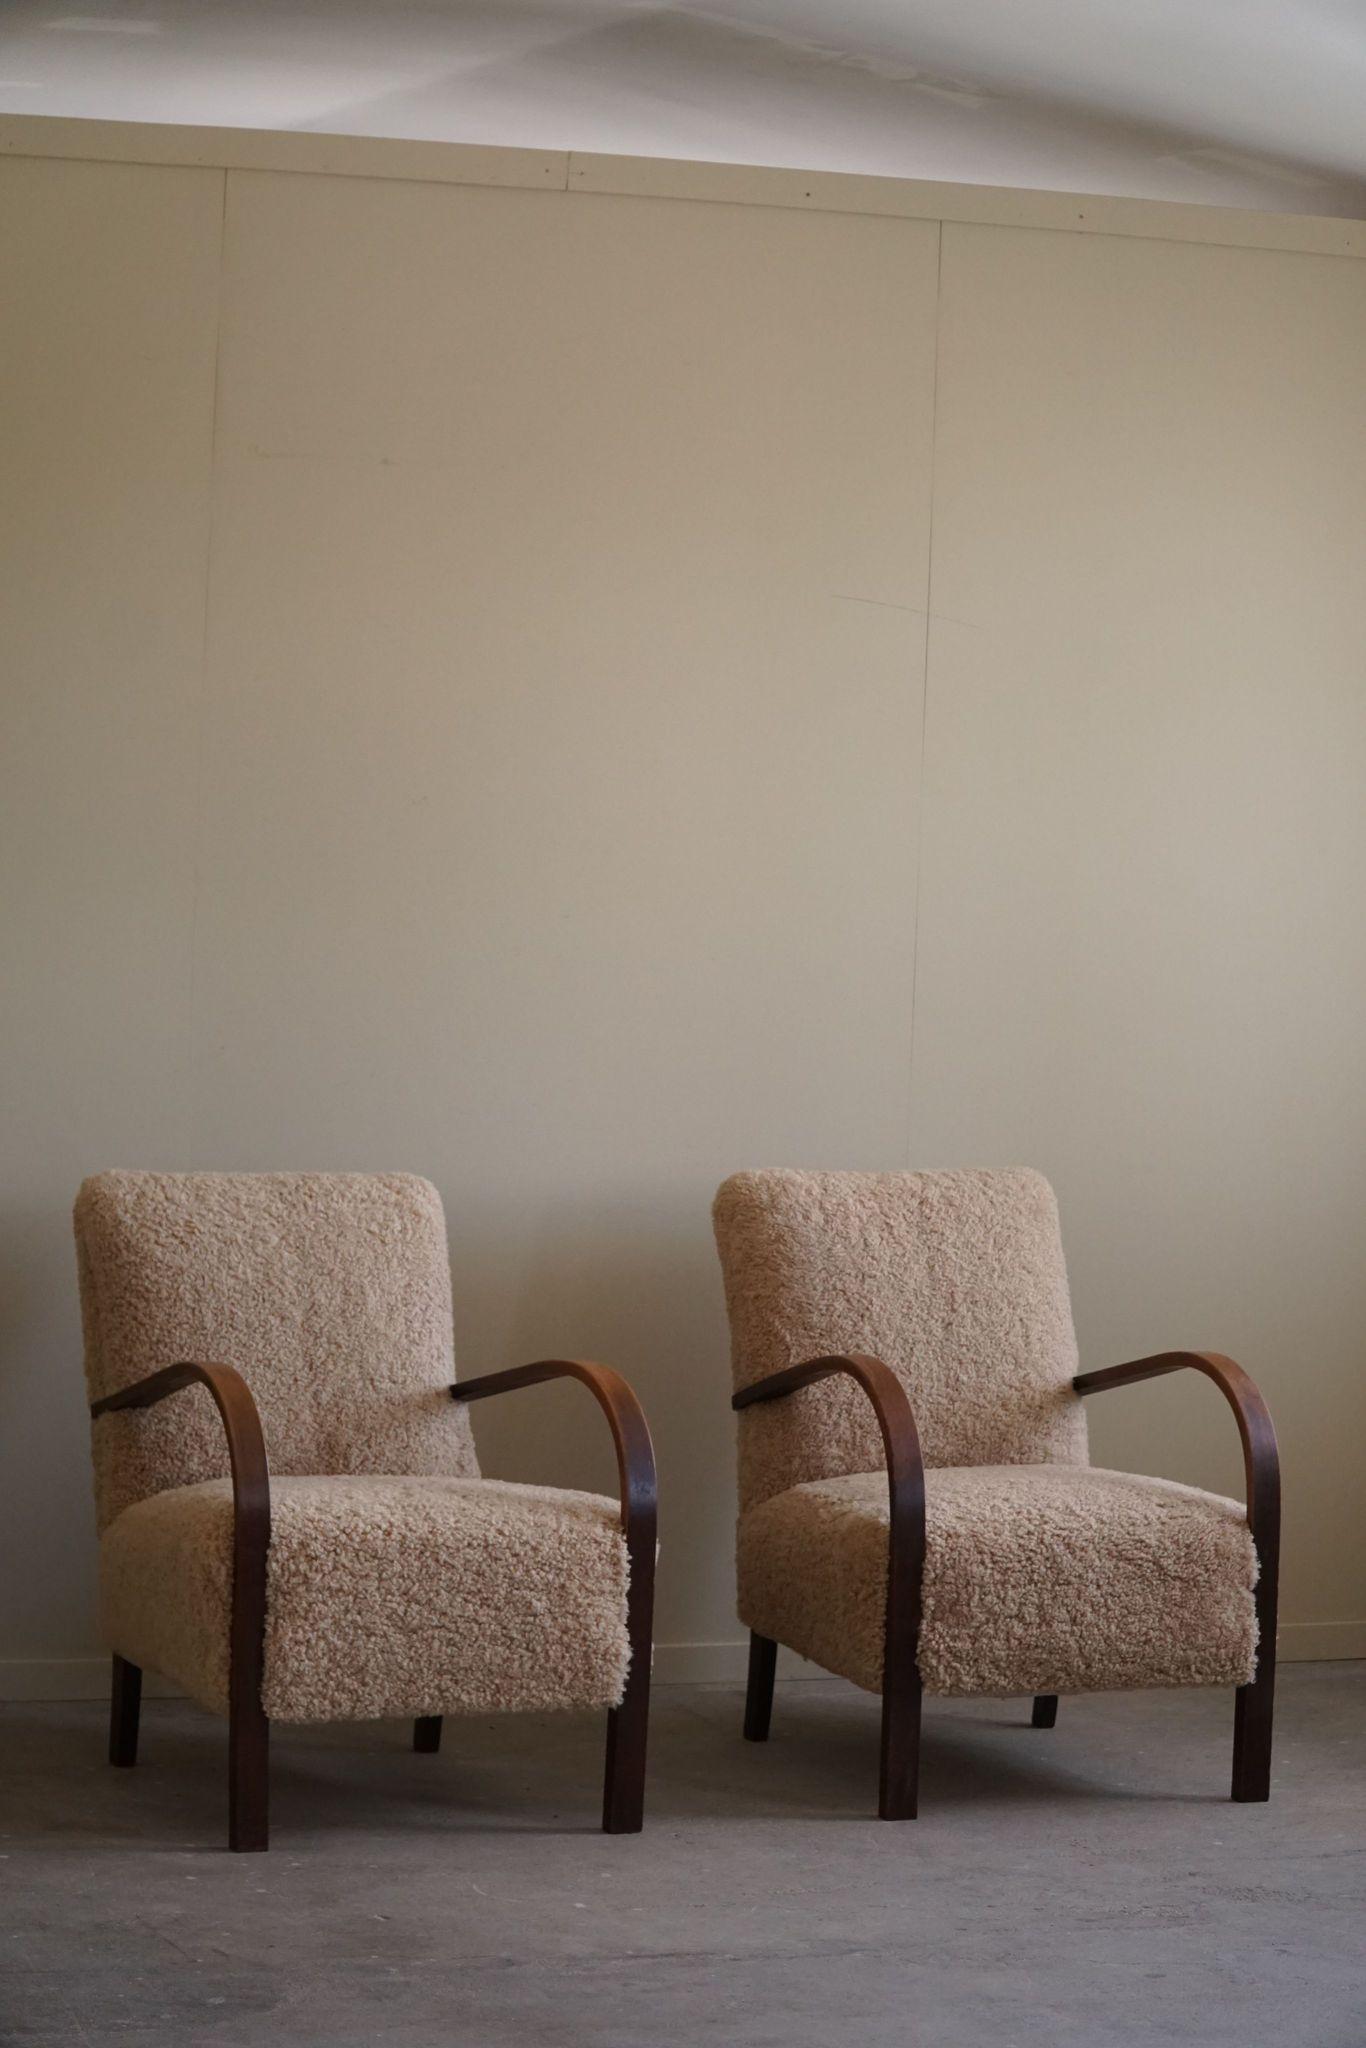 Fritz Hansen, Pair of Danish Curved Art Deco Lounge Chairs, Reupholstered, 1940s For Sale 1